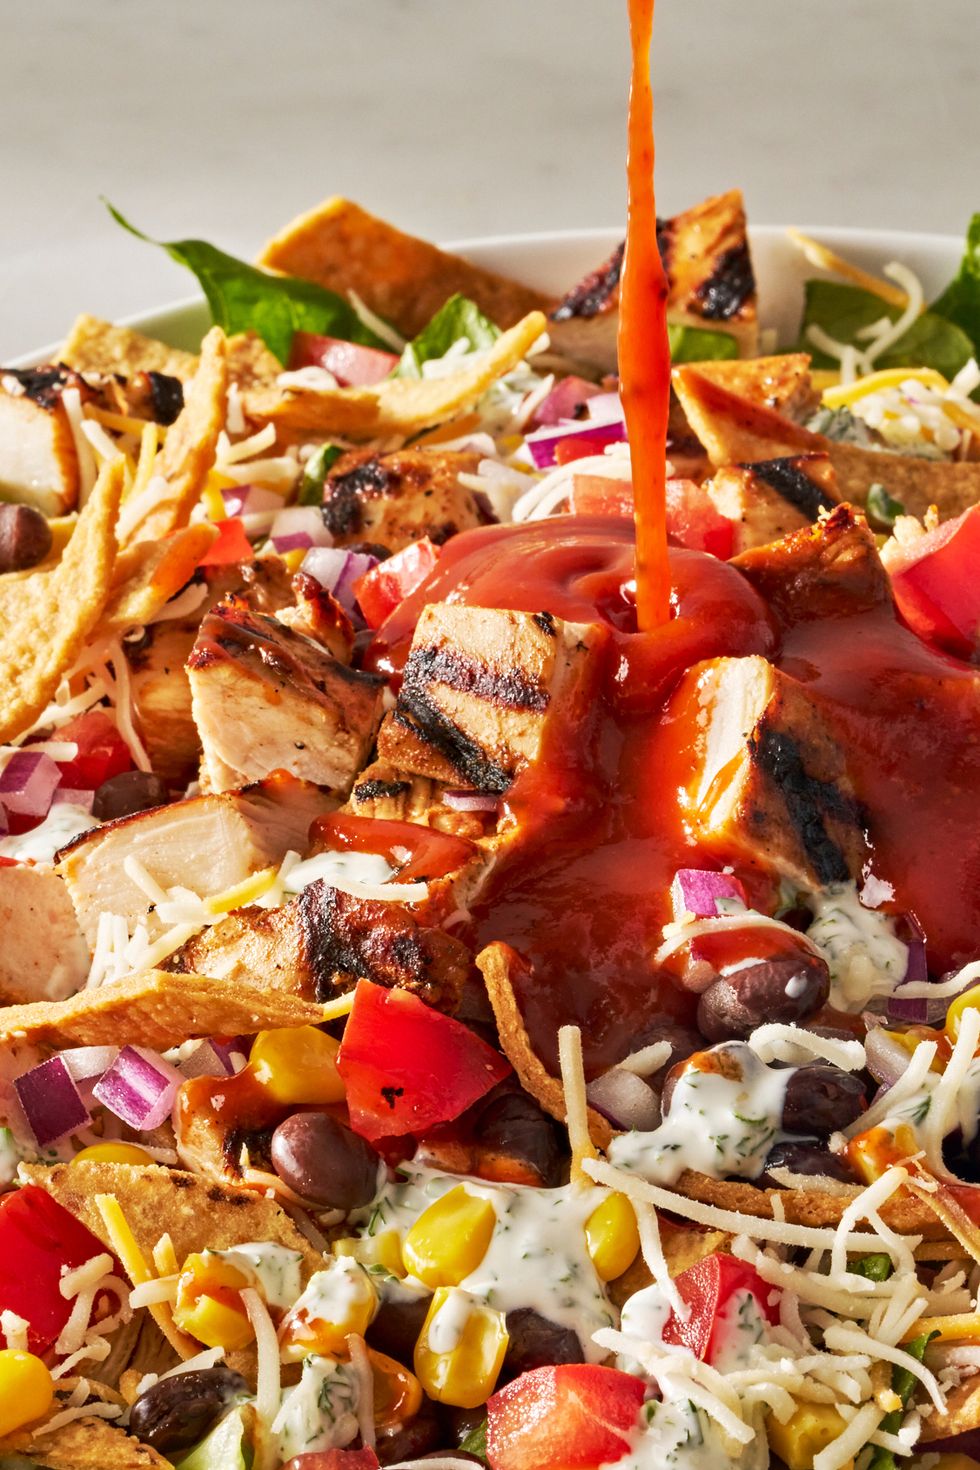 bbq chicken salad with barbecue sauce, chicken, toppings, and a creamy dressing